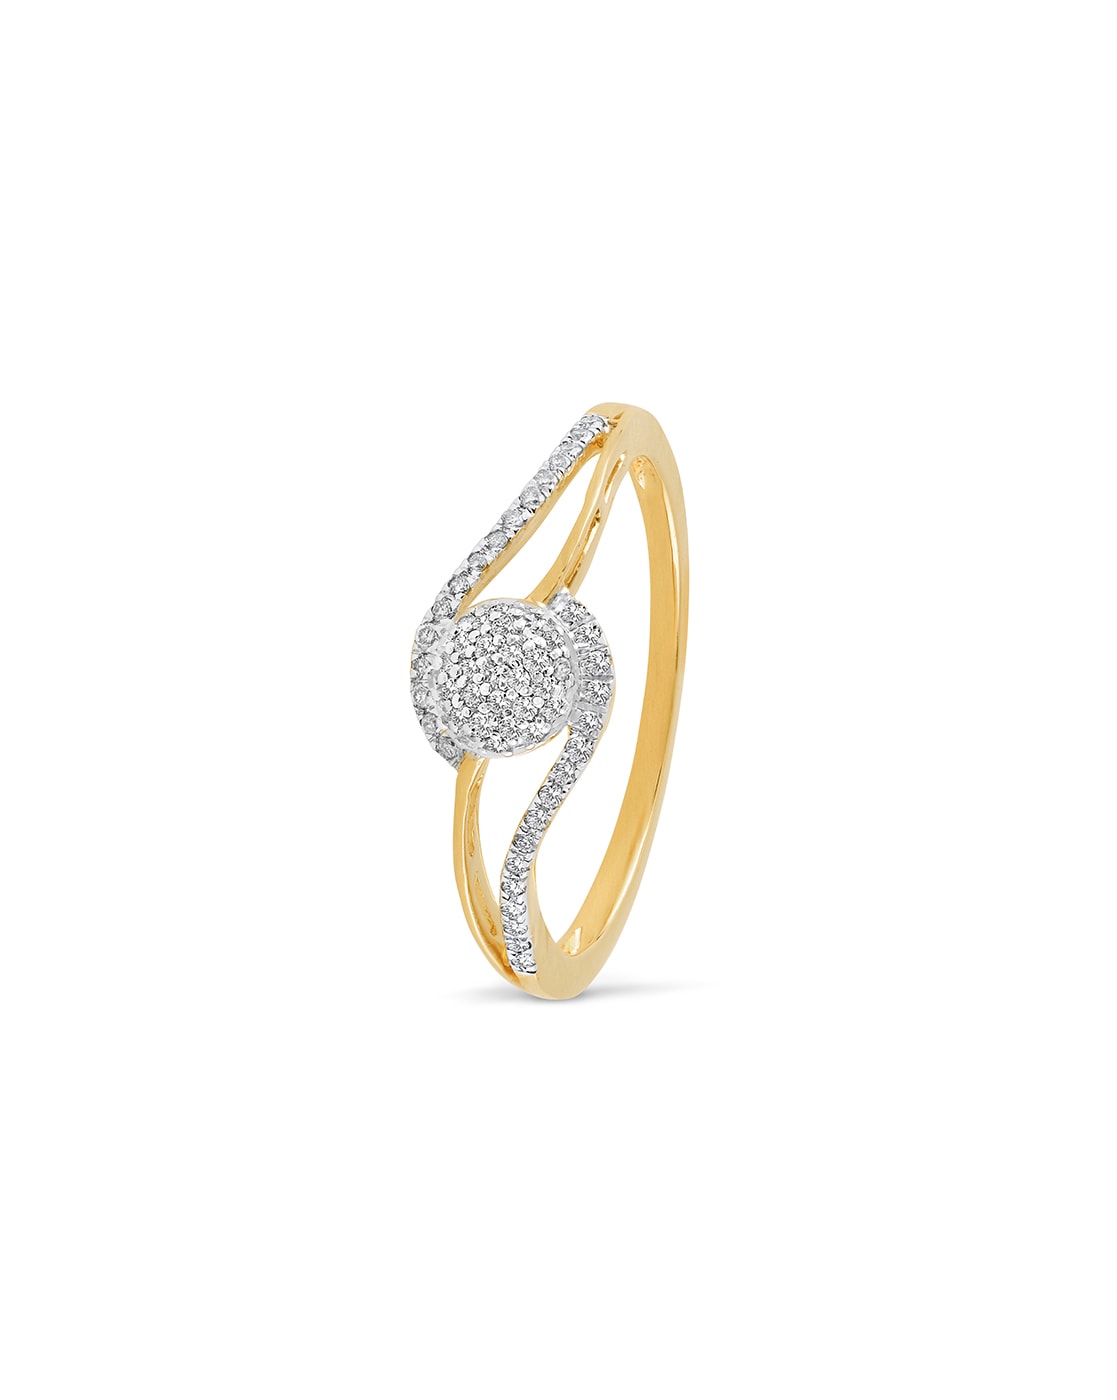 Buy Reliance Jewels 14KT Diamond Ring 1.58 g Online at Best Prices in India  - JioMart.